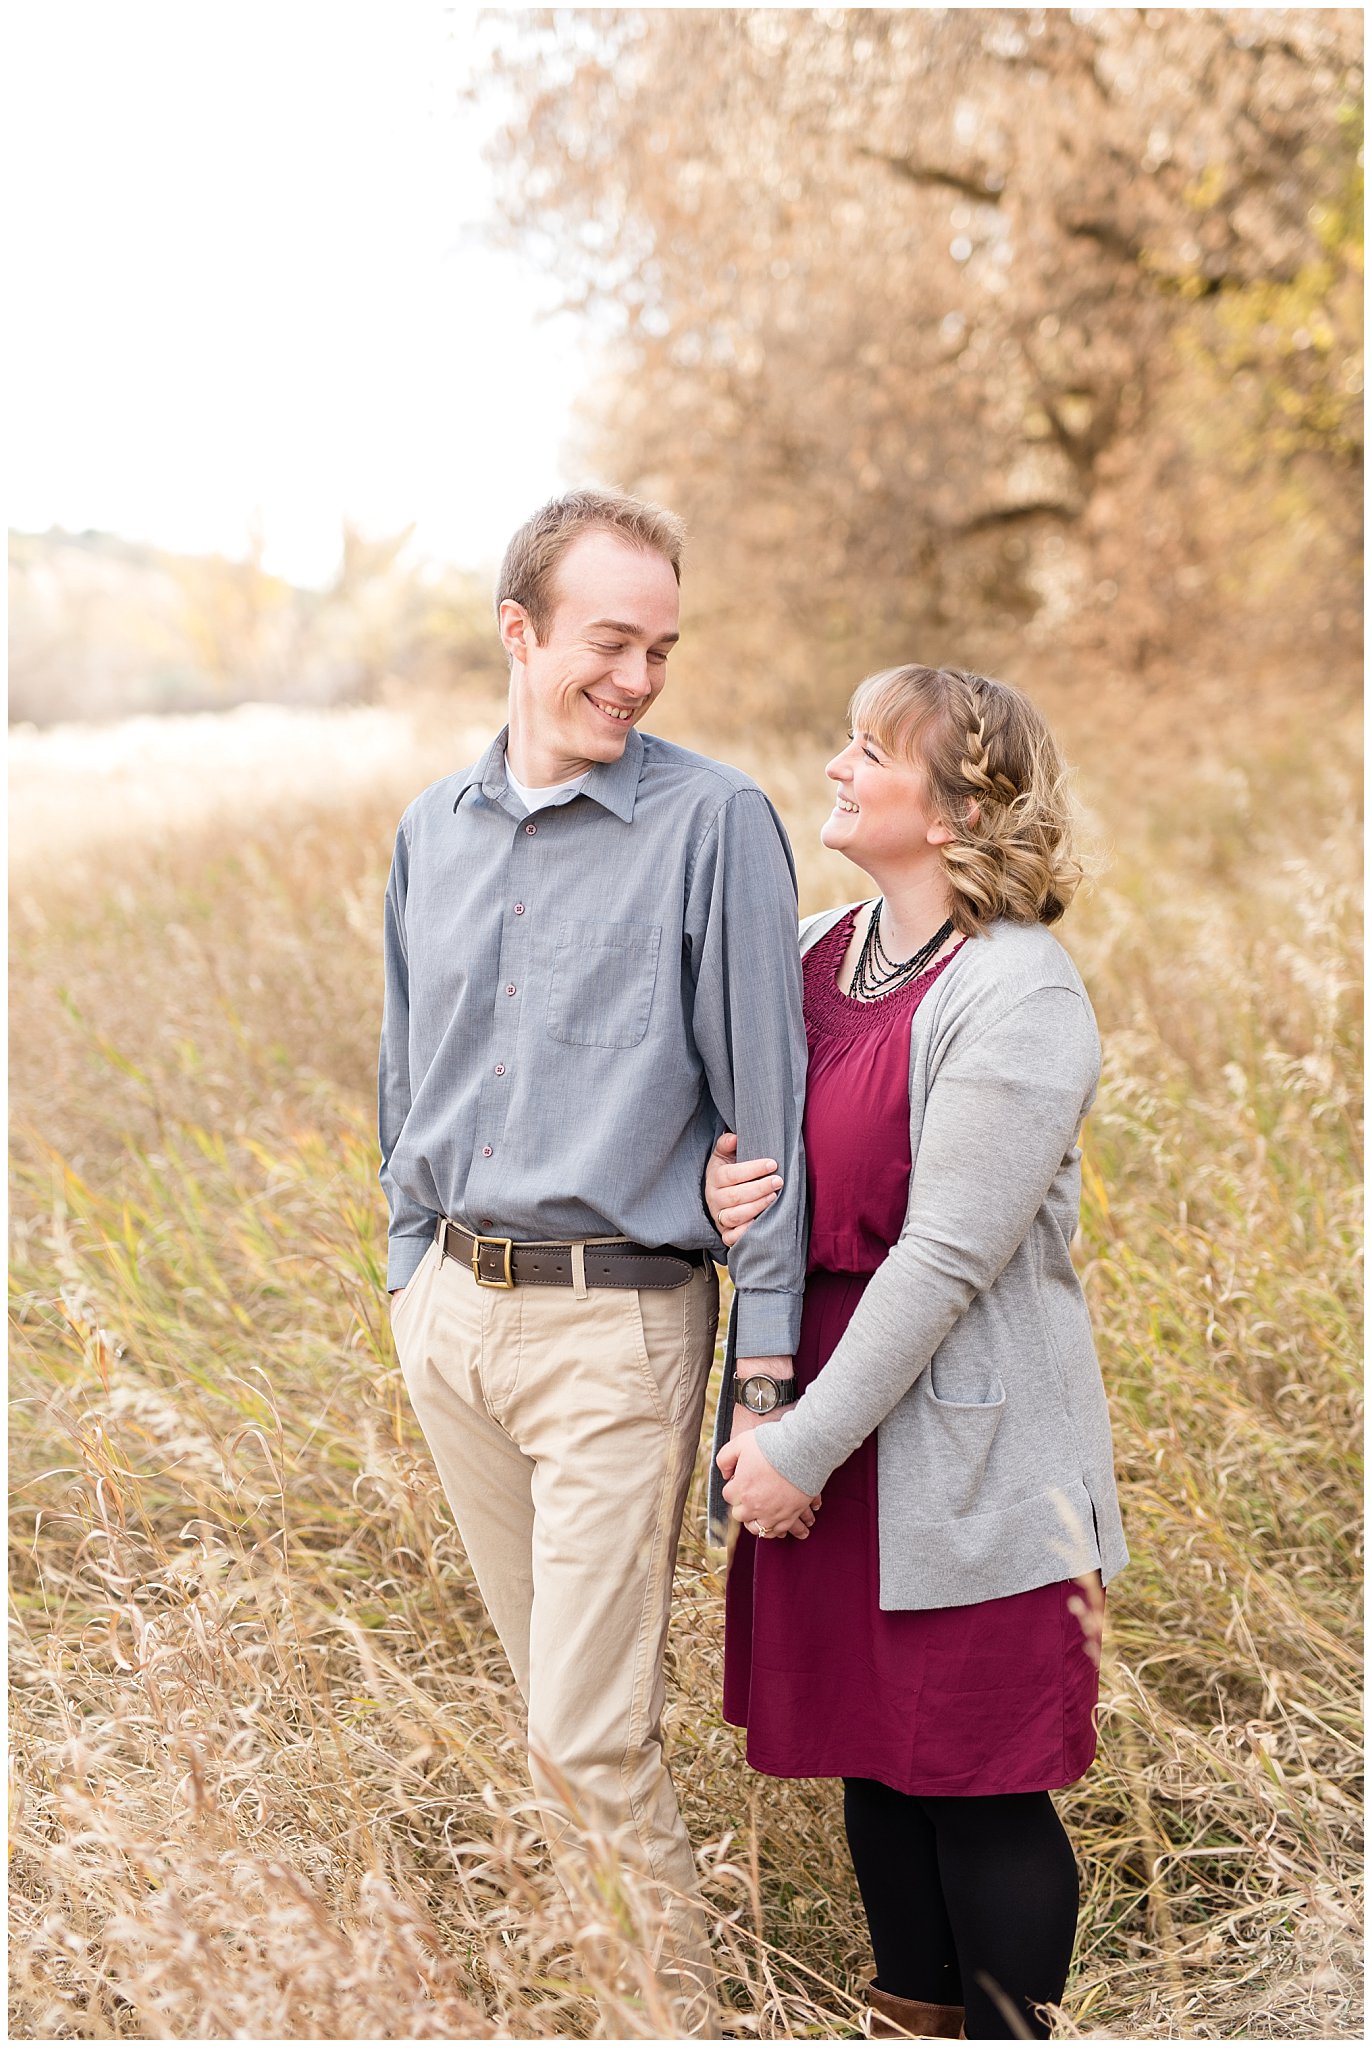 Couple laughing in a field | Davis County Fall Engagement | Utah Wedding Photographers | Jessie and Dallin